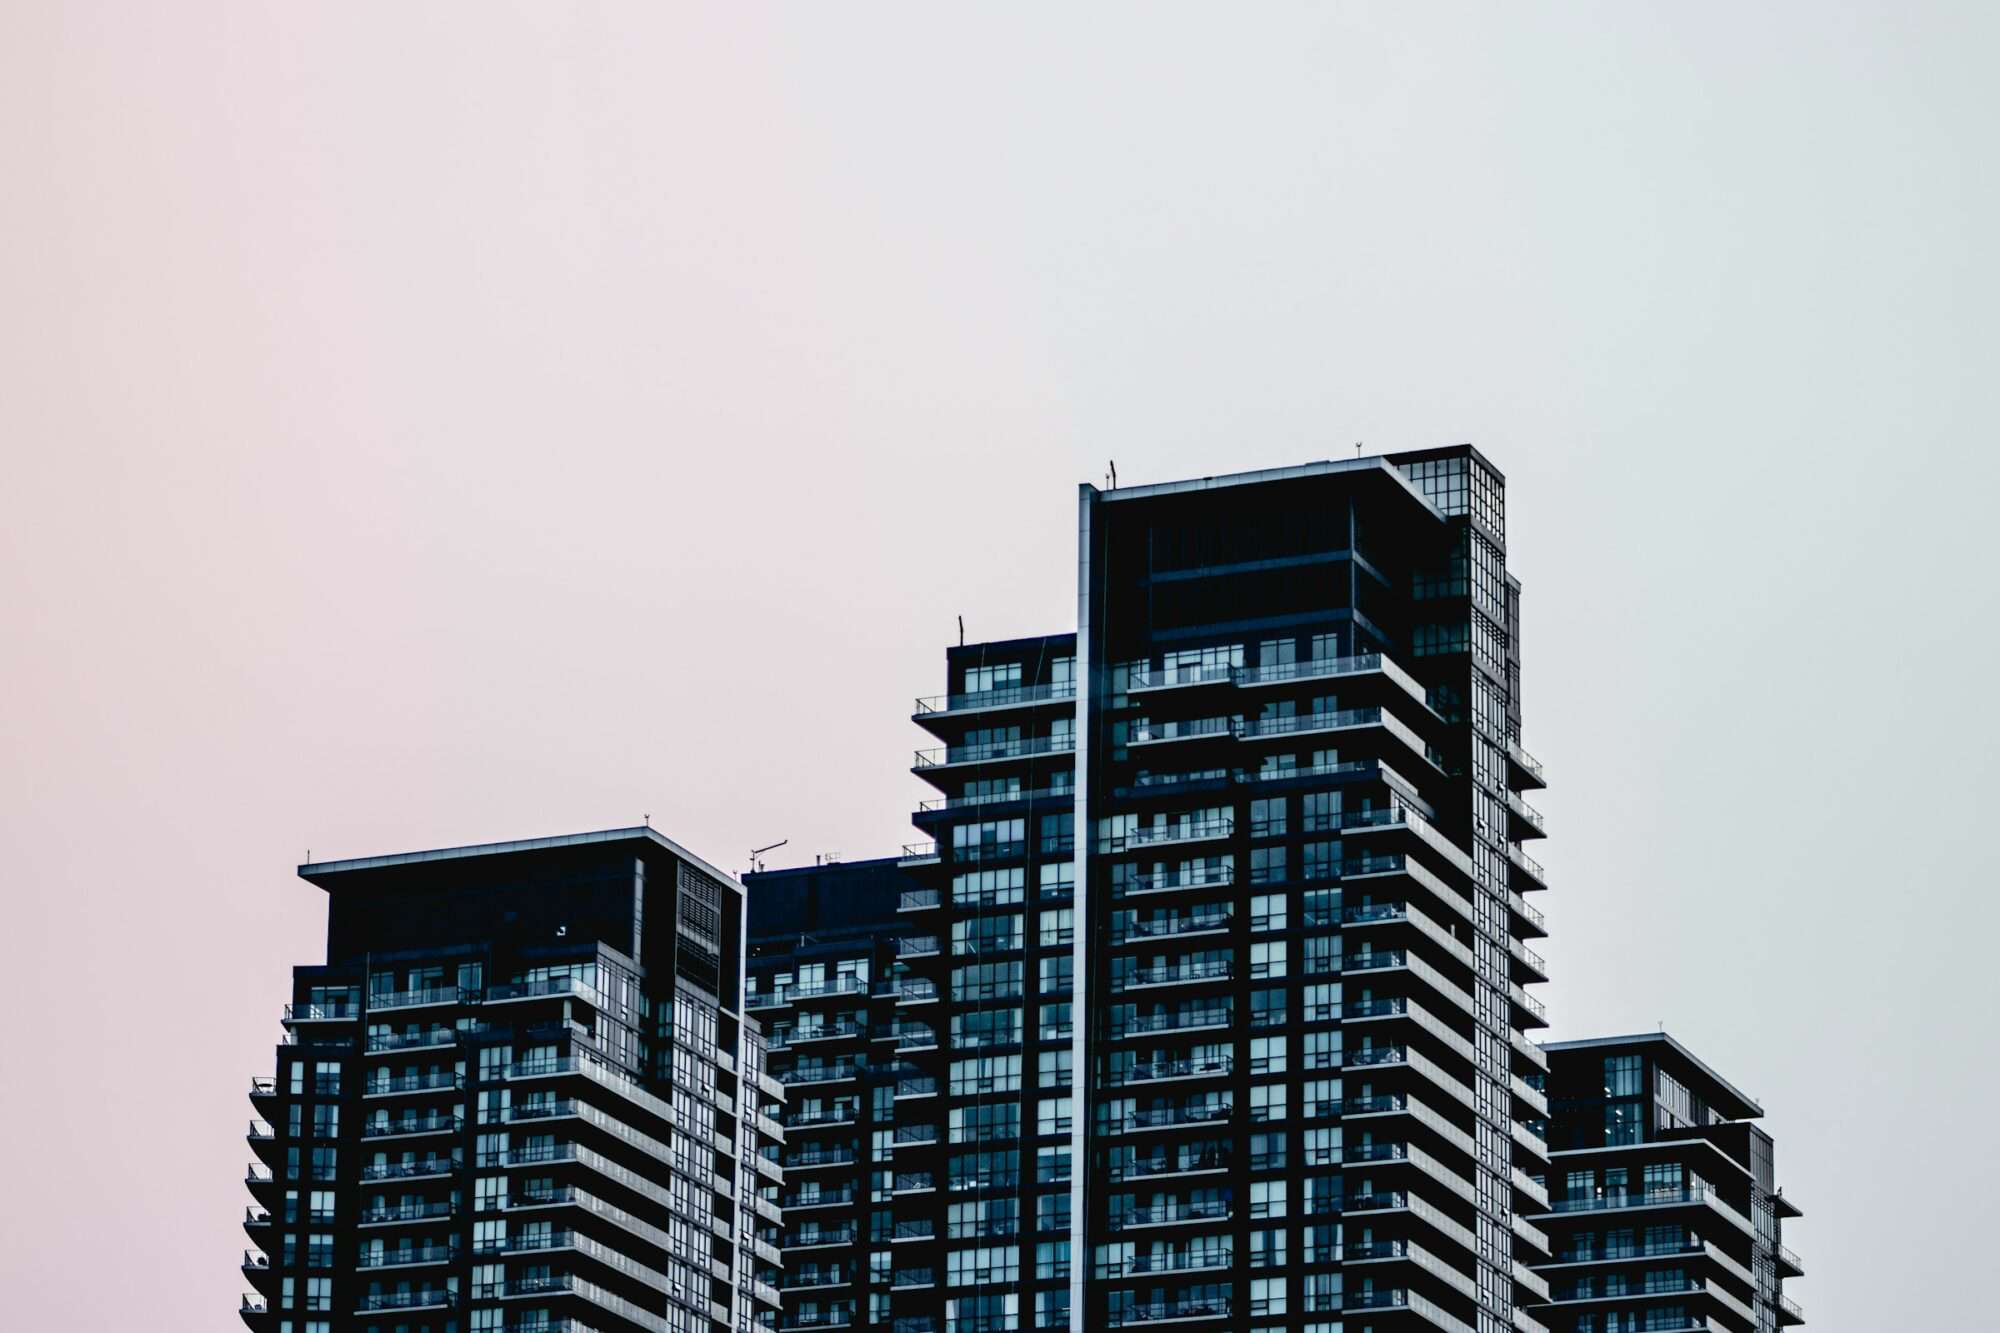 Addressing the Rise of Investor Ownership of Housing, Part 1: Assessing the Scale and Impacts across Canada